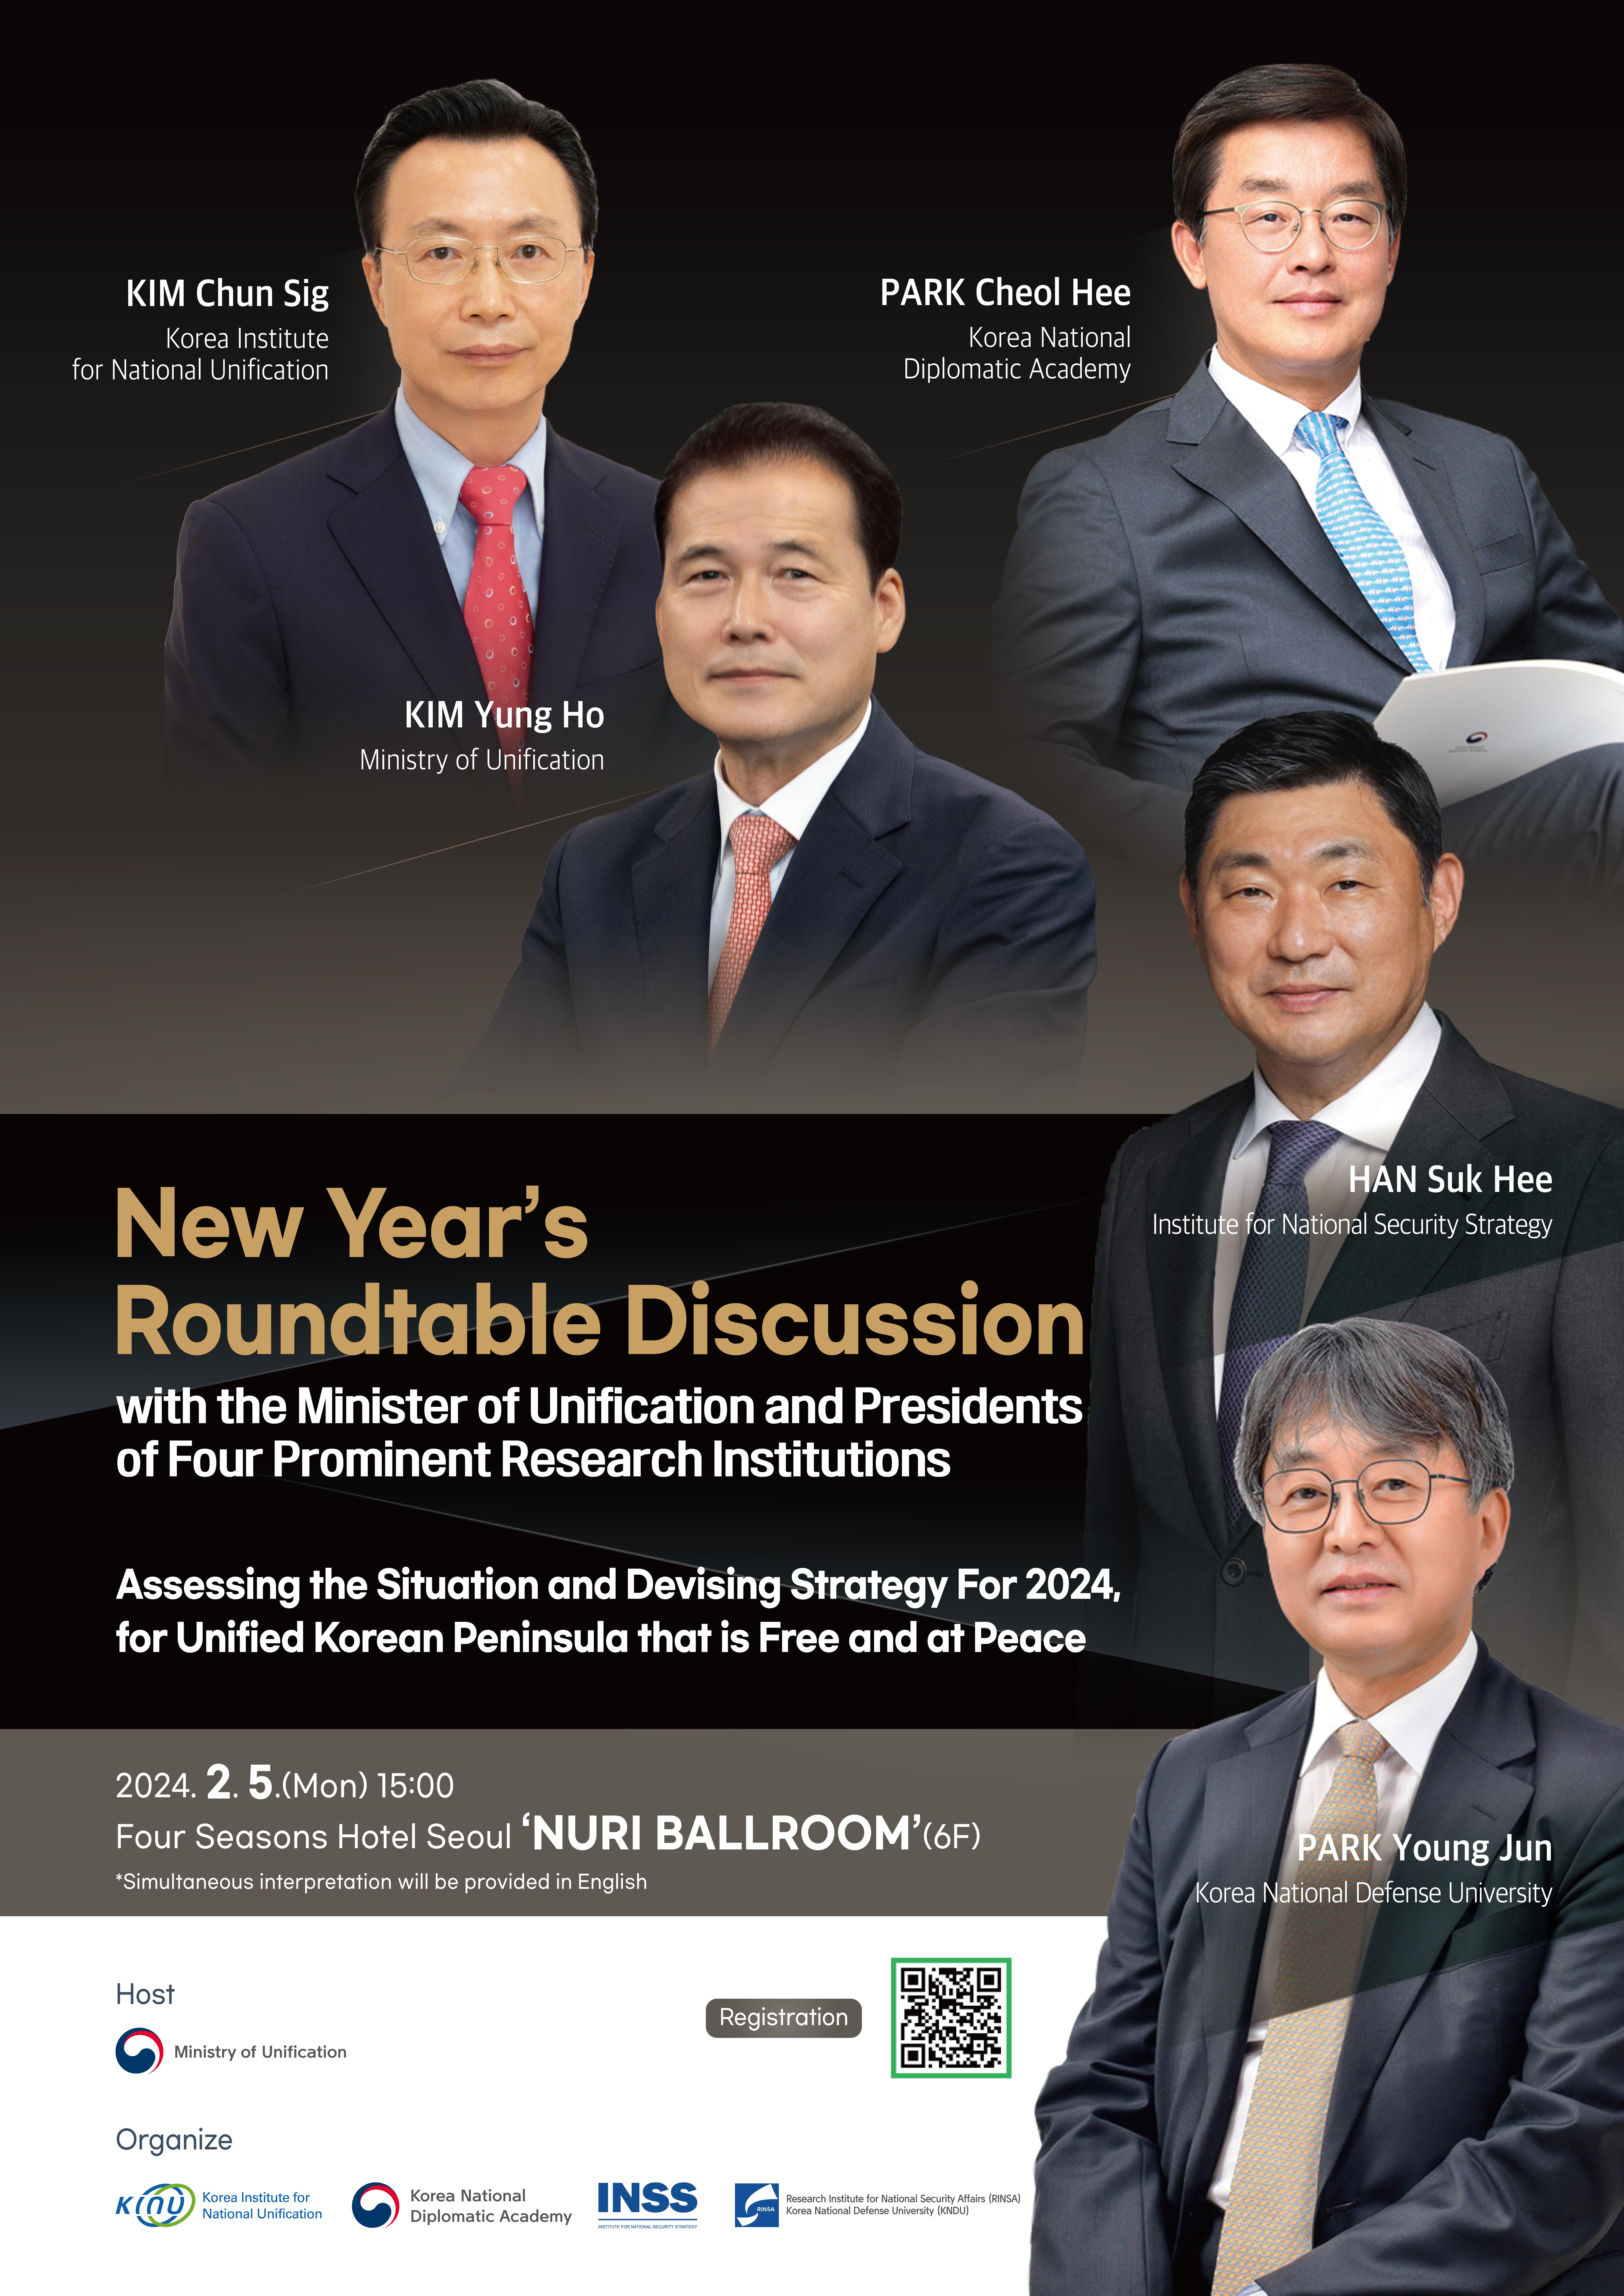 New Year’s Roundtable Discussion with the Minister of Unification and Presidents of Four Prominent Research Institutions(Feb 5)